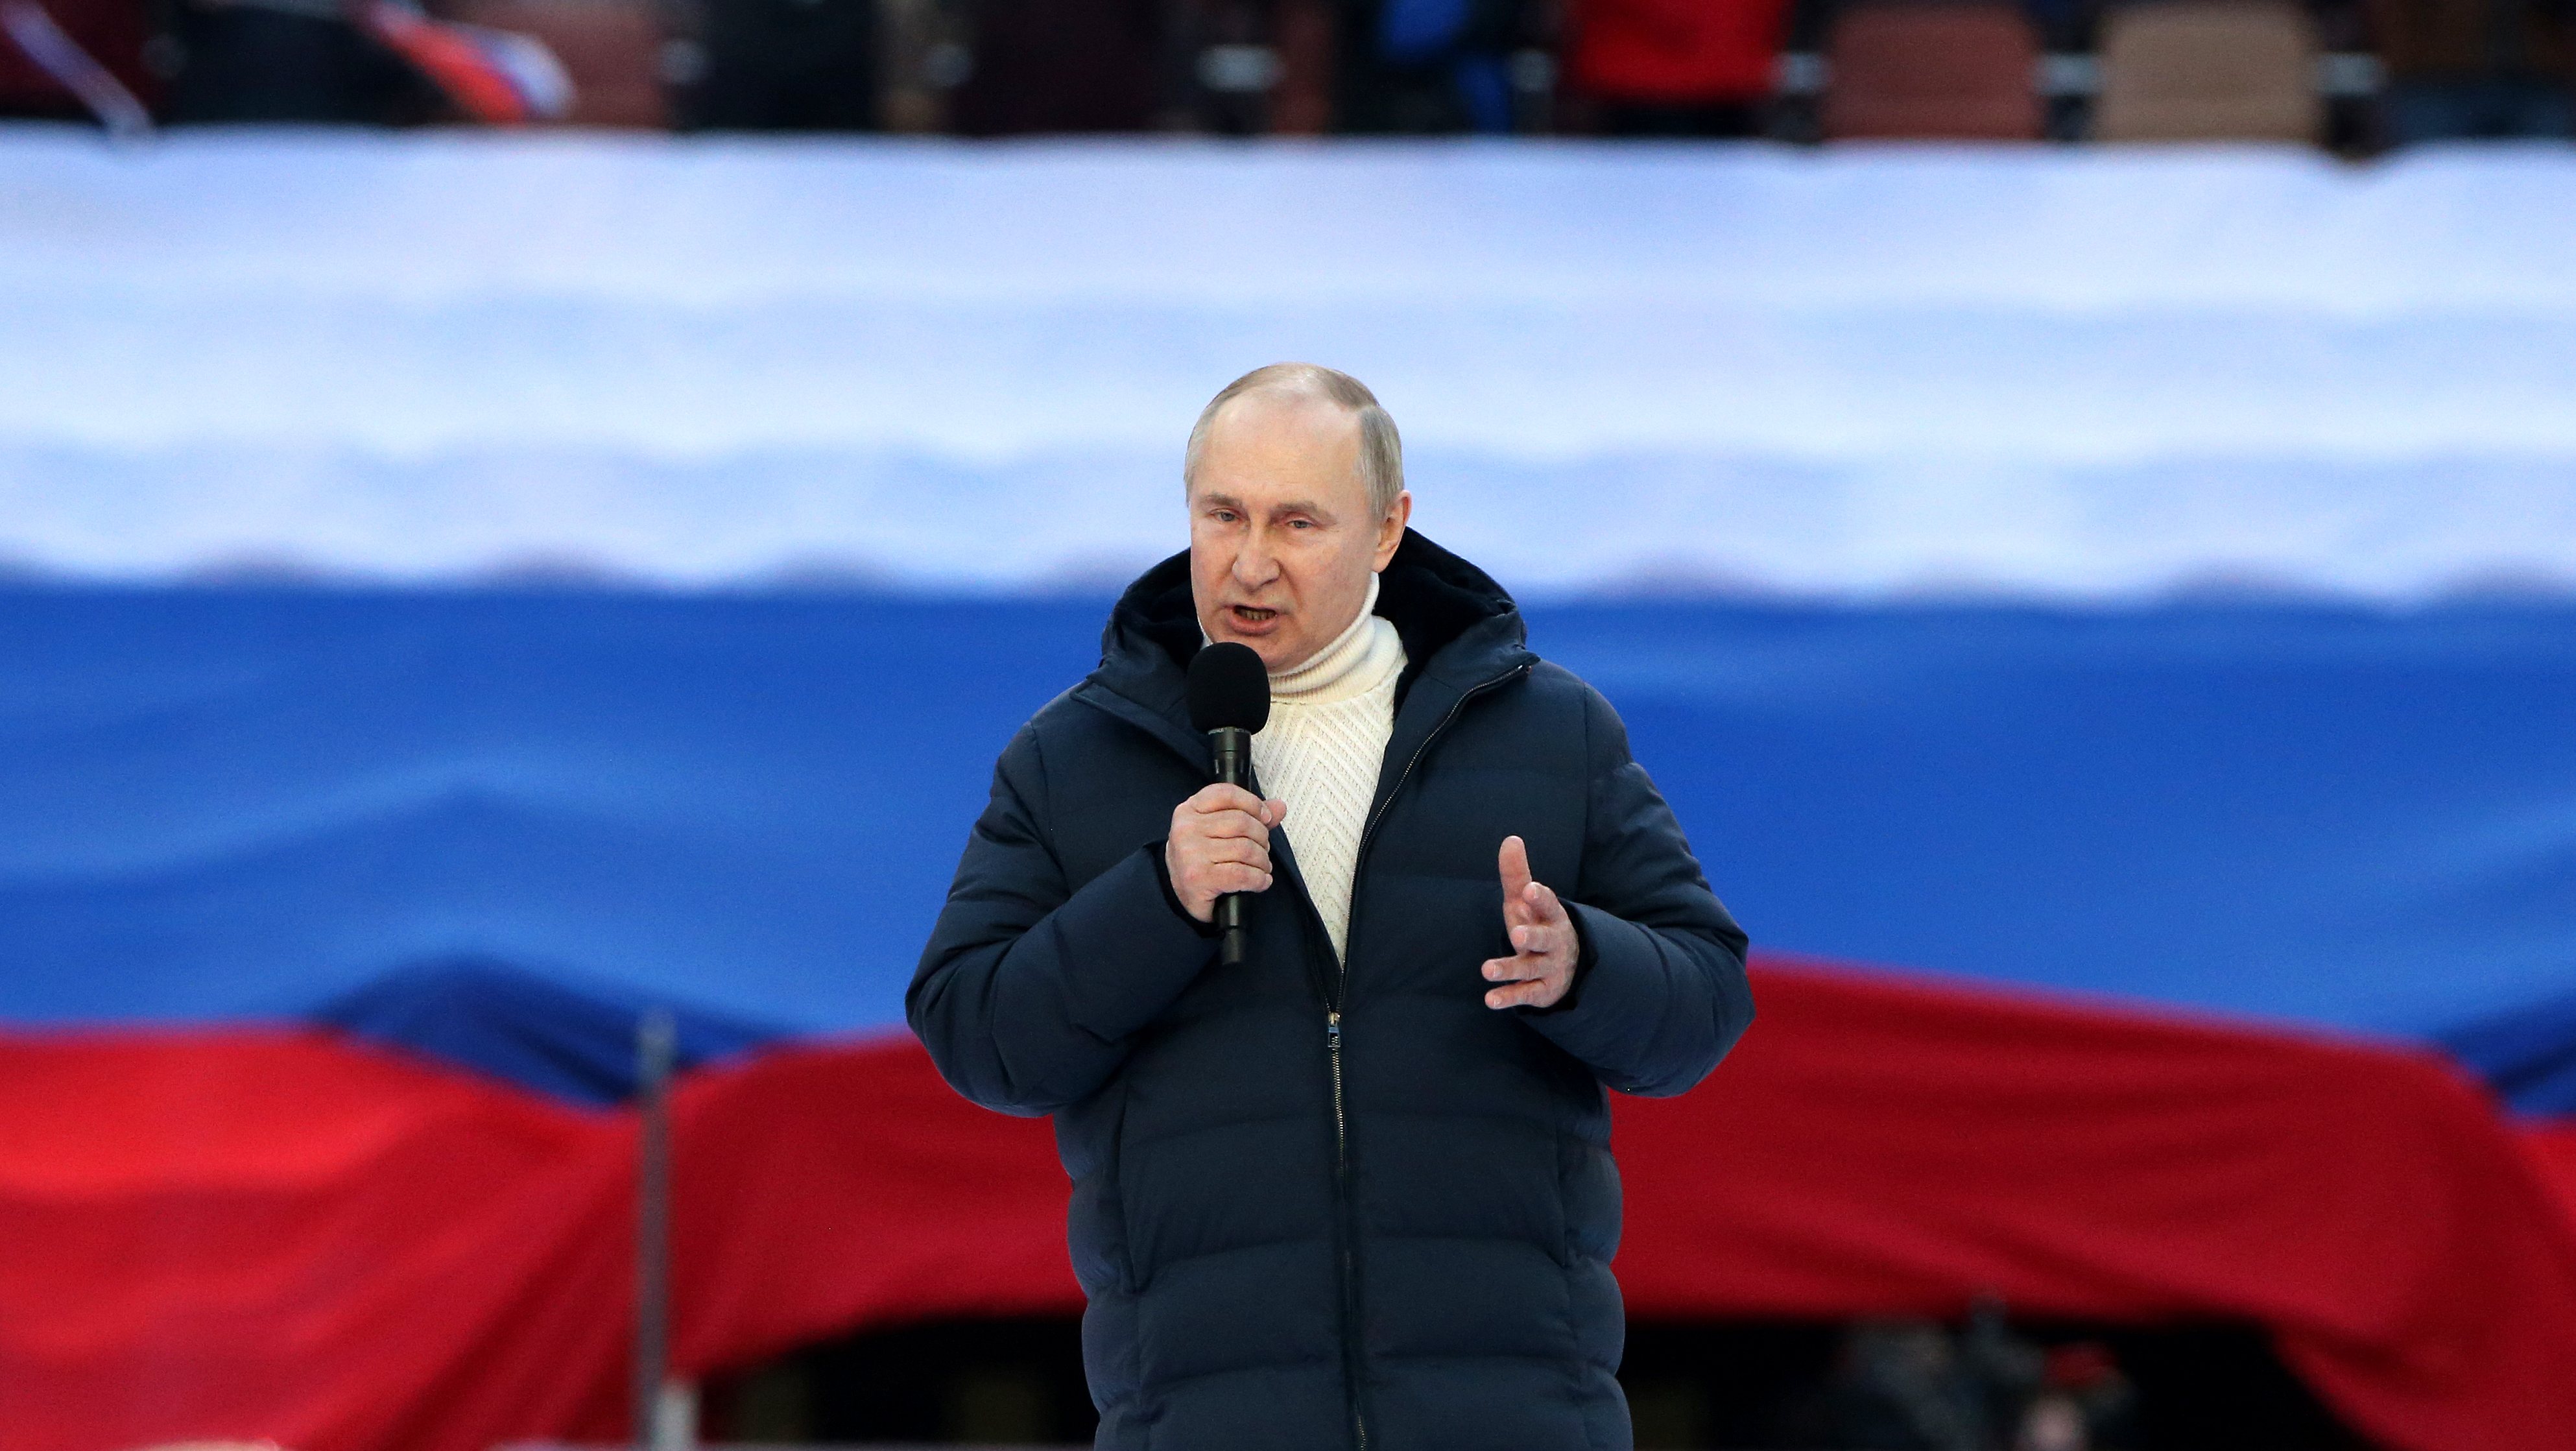 President Putin Addresses Supporters On Anniversary Of Annexation Of Crimea